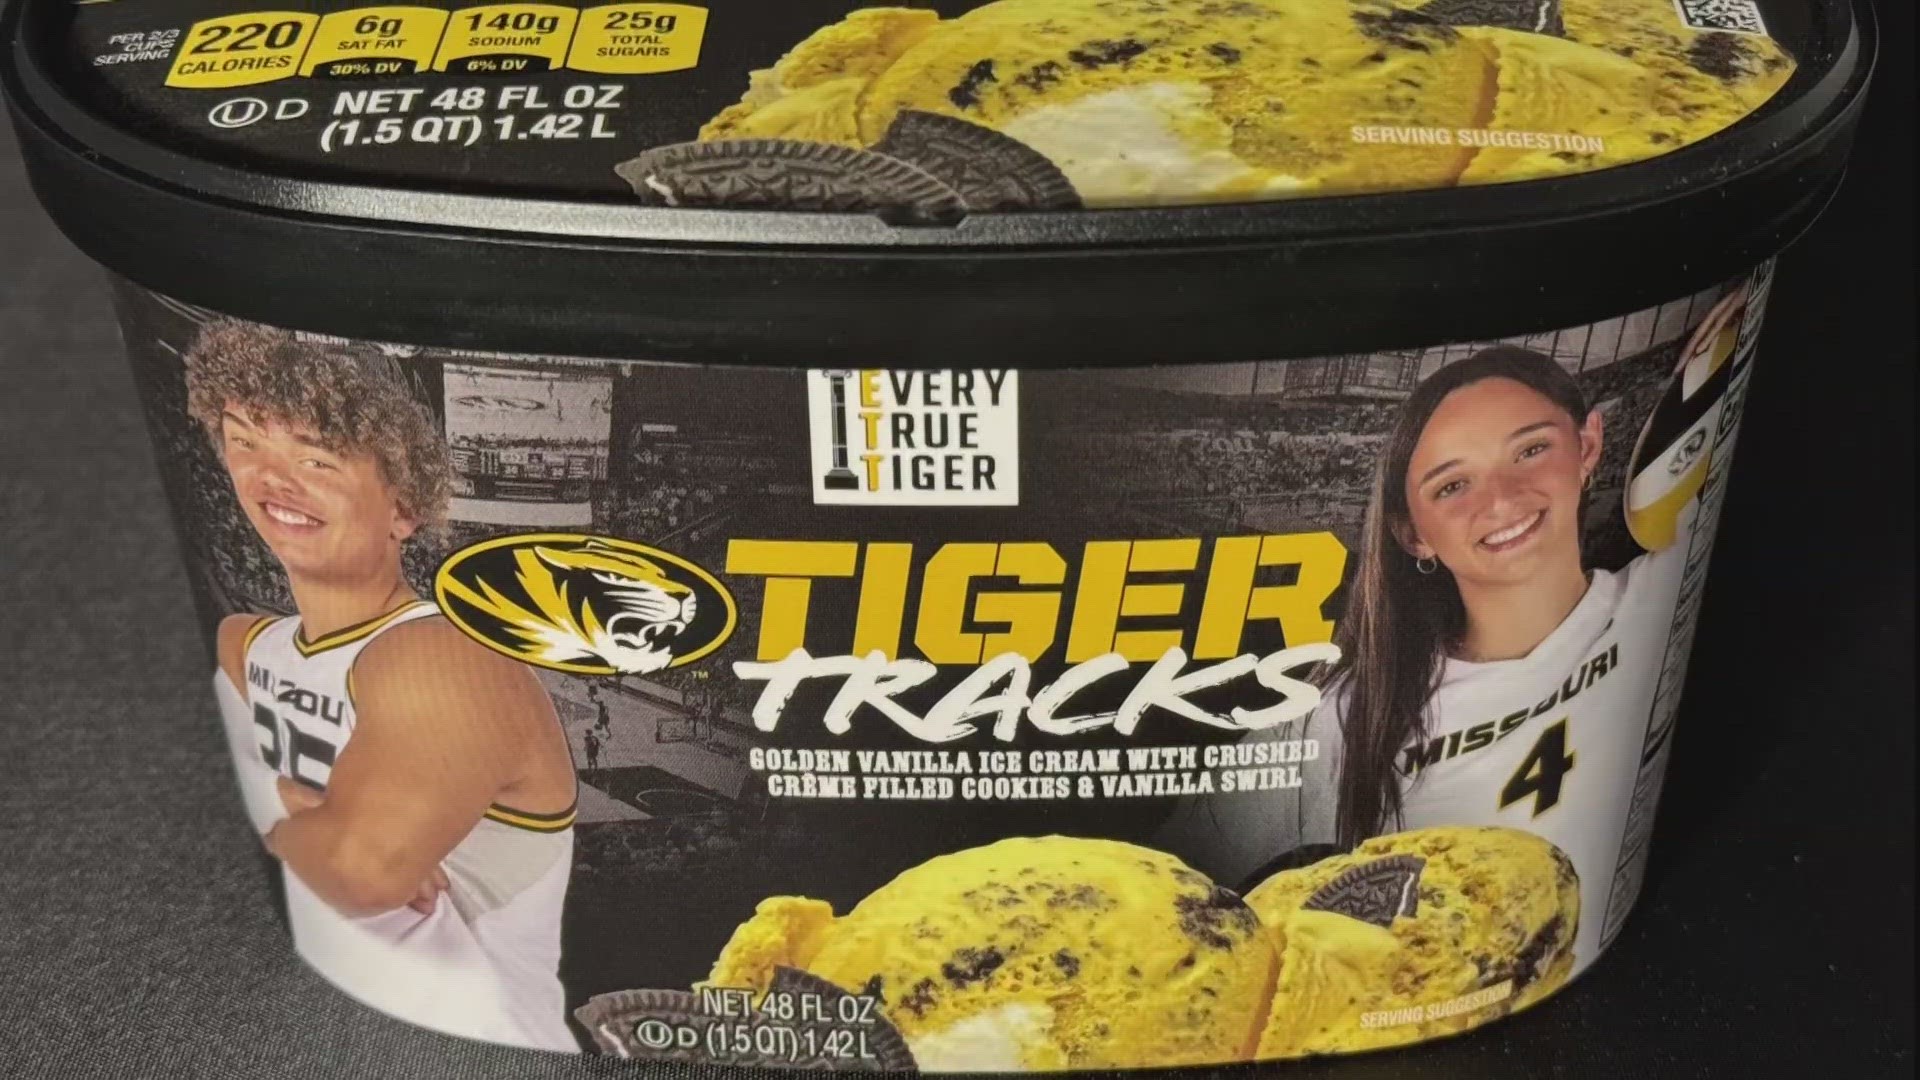 Four different Tigers from four different sports are on the tub. Previously, the company has produced potato chips and pizzas.